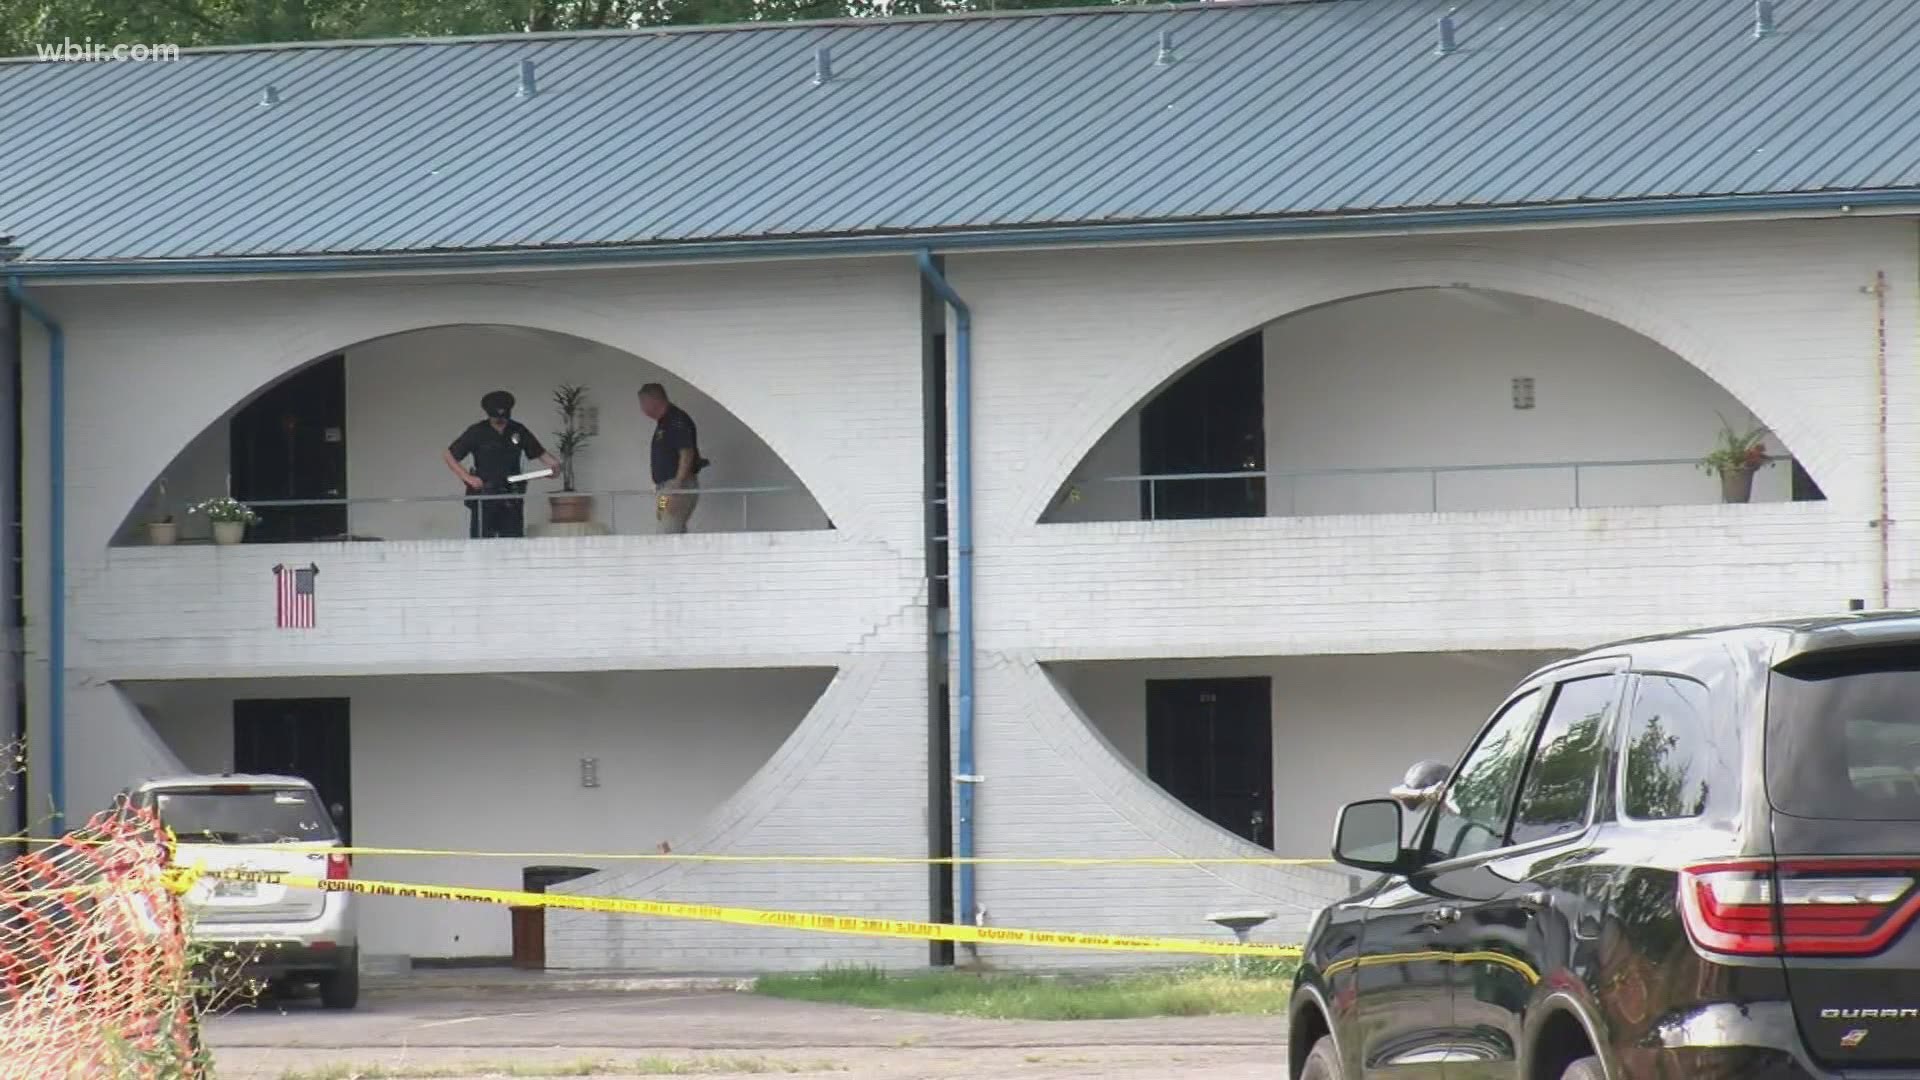 The TBI says it's looking into an officer-involved shooting of a woman in Kingsport. The woman later died.